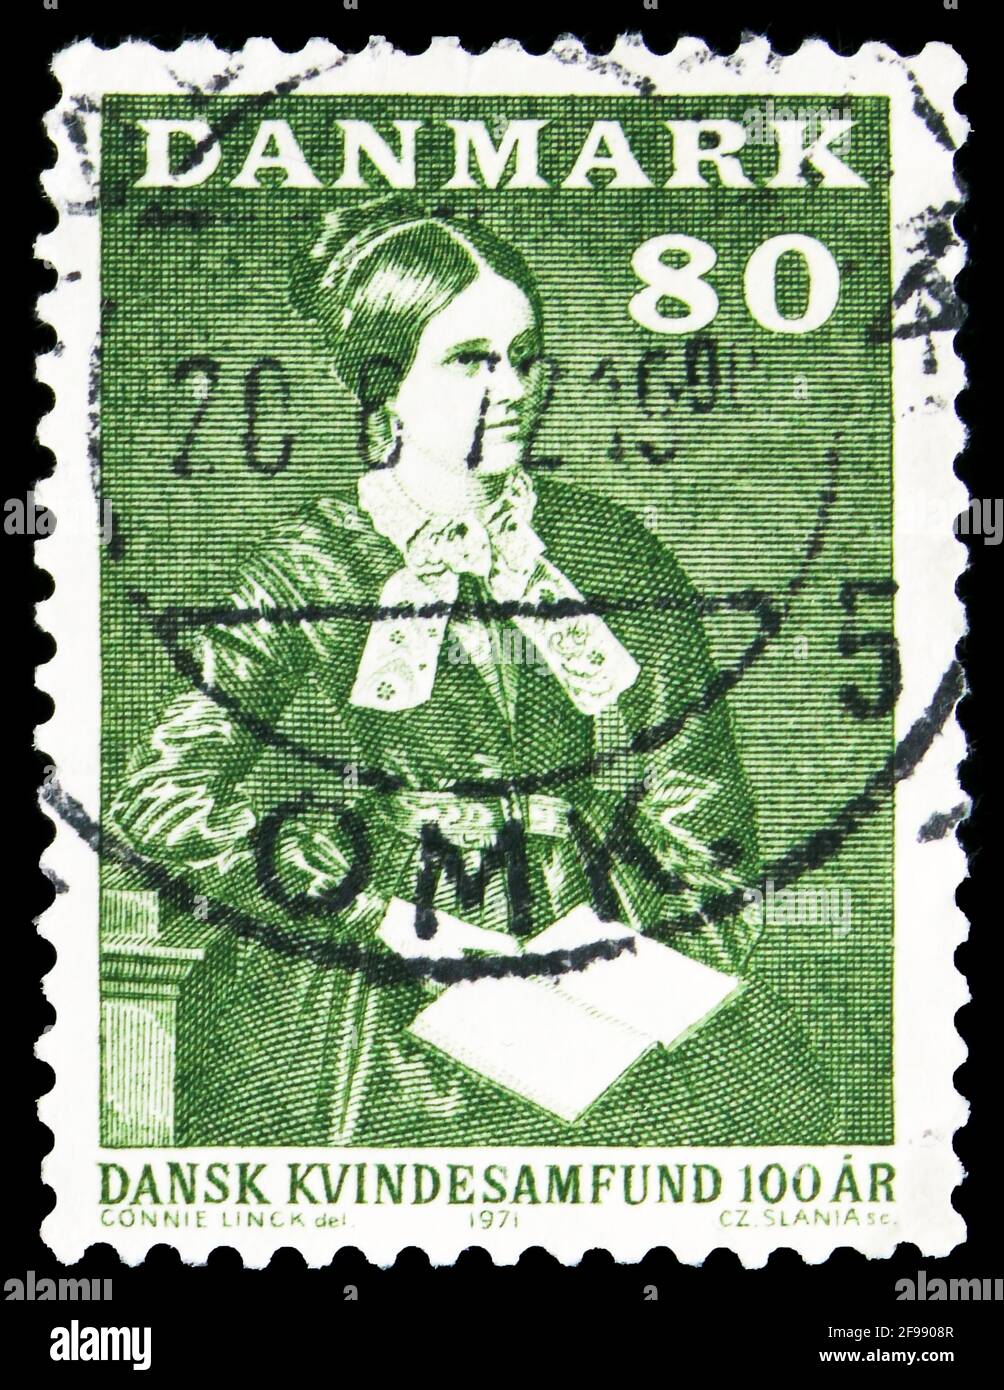 MOSCOW, RUSSIA - NOVEMBER 4, 2019: Postage stamp printed in Denmark shows Mathilde Fibiger (suffragette), Danish Women's Association serie, circa 1971 Stock Photo